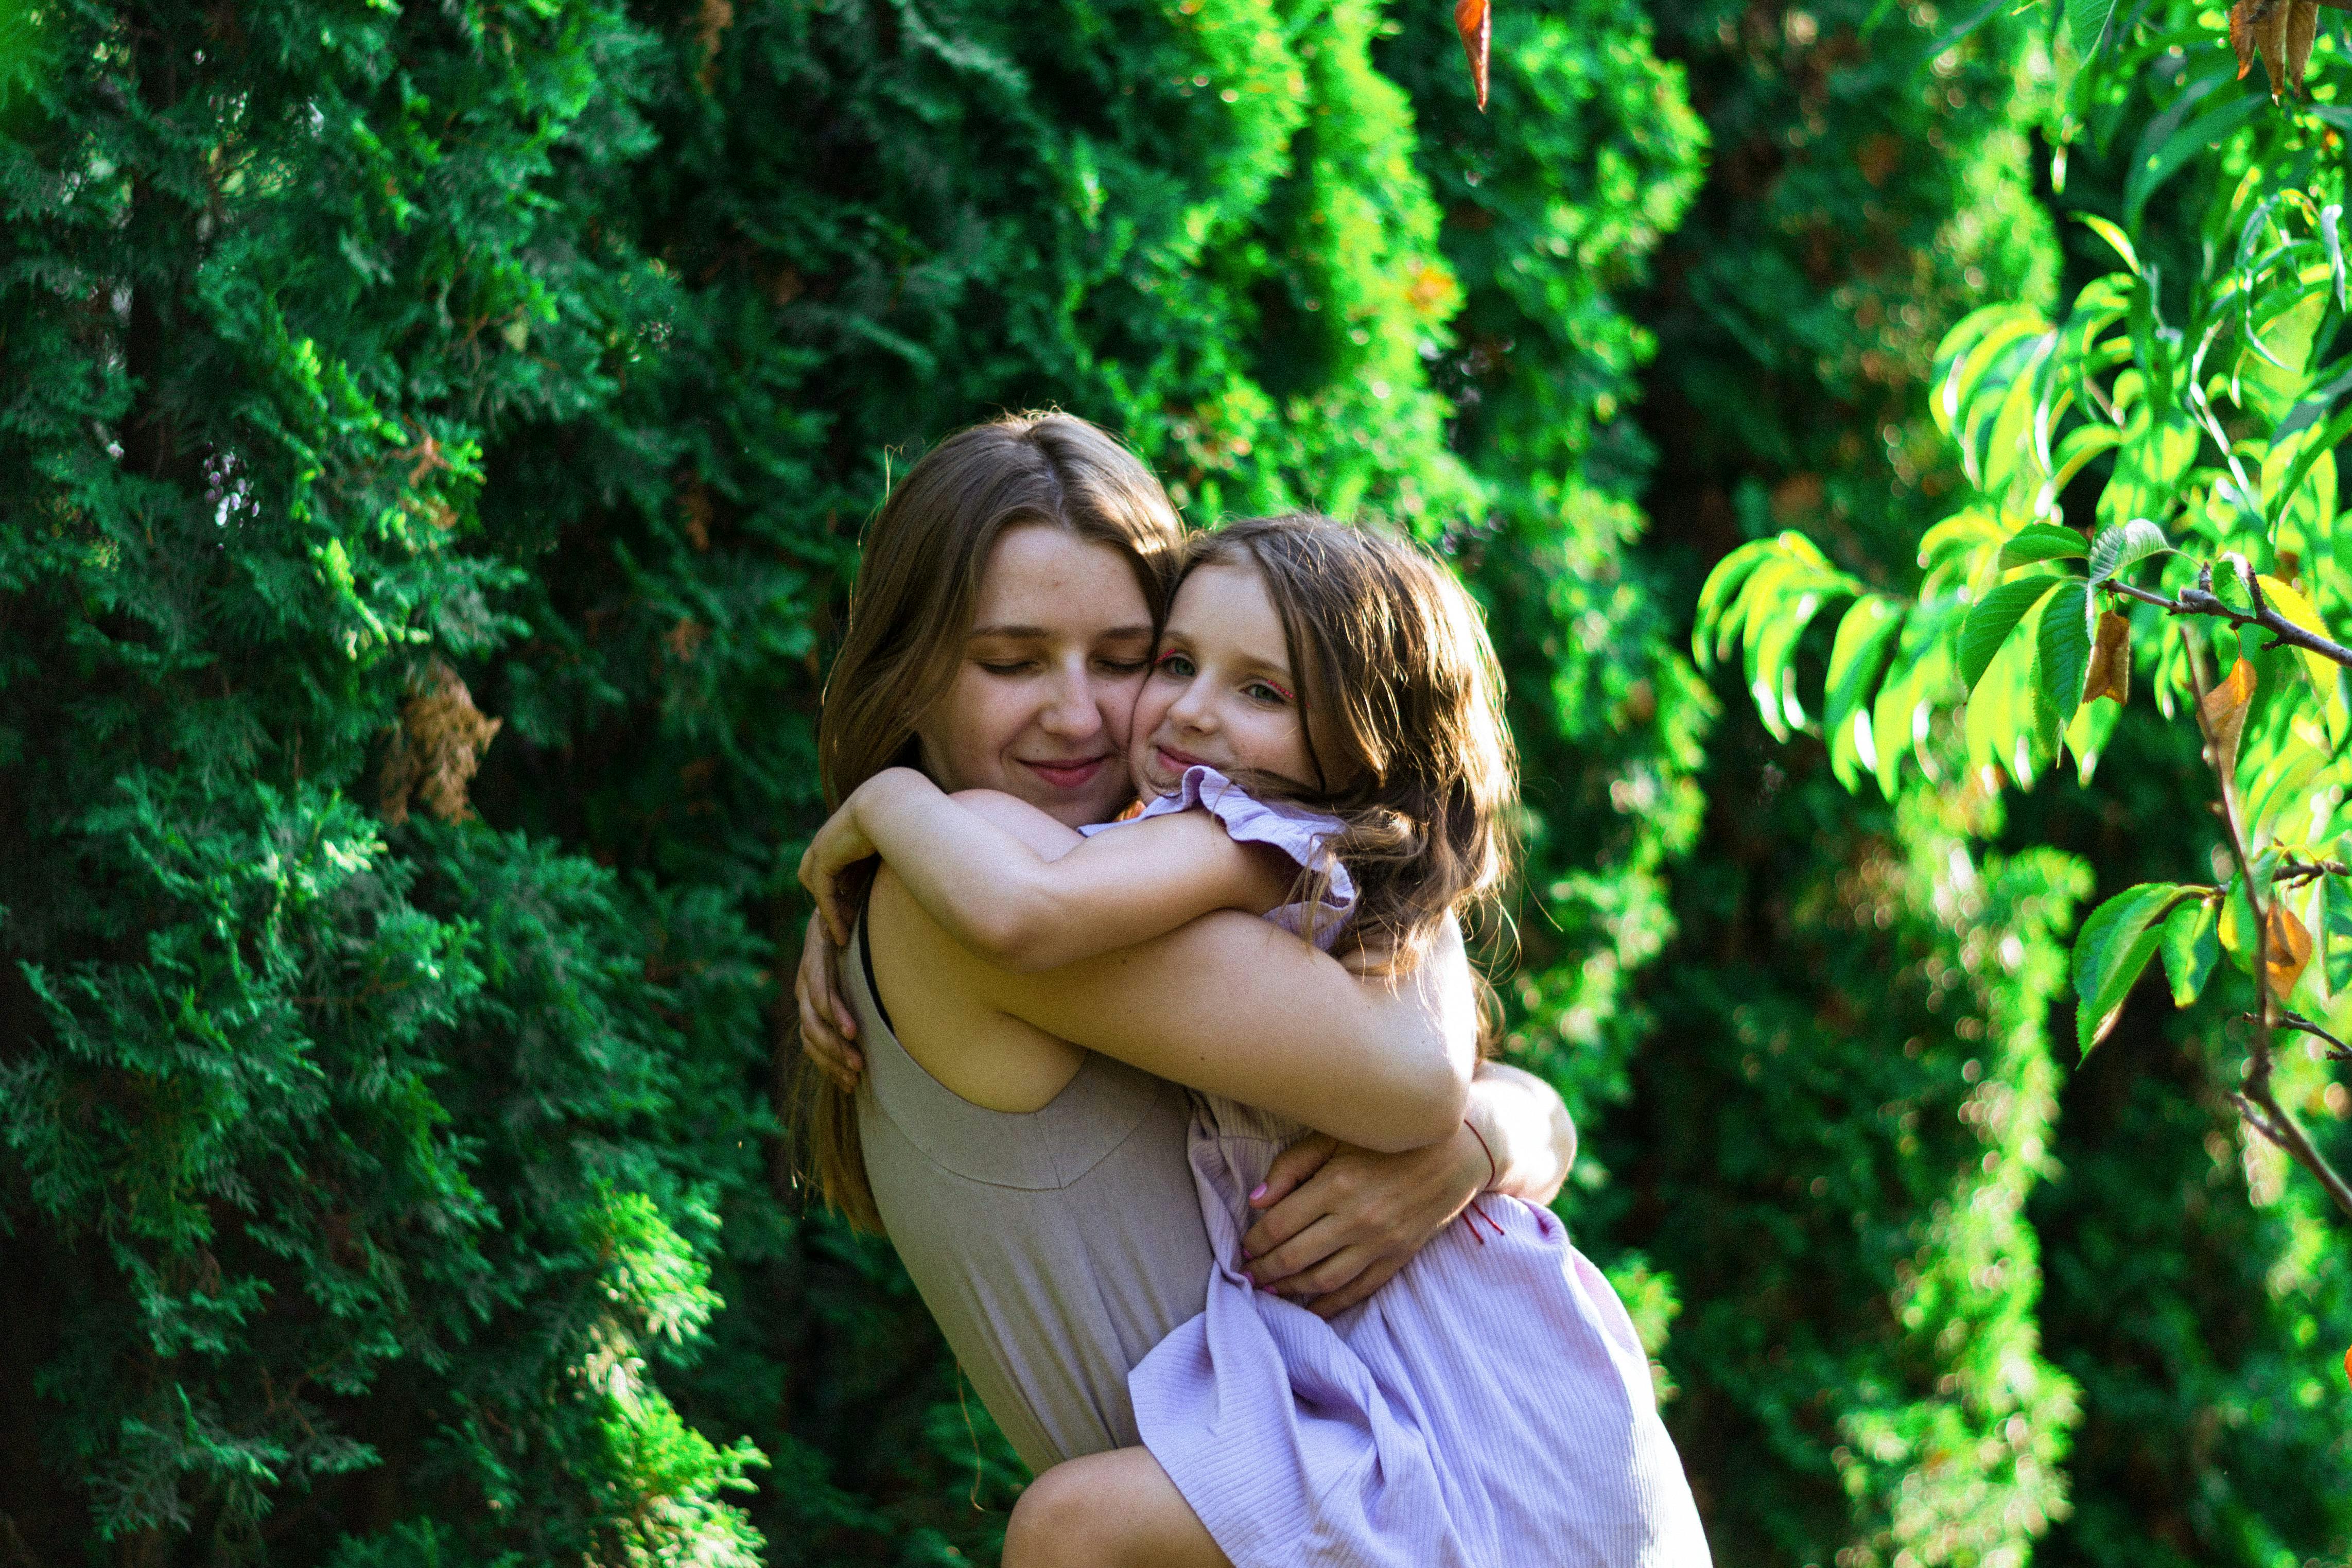 A mother warmly embracing her daughter | Source: Pexels